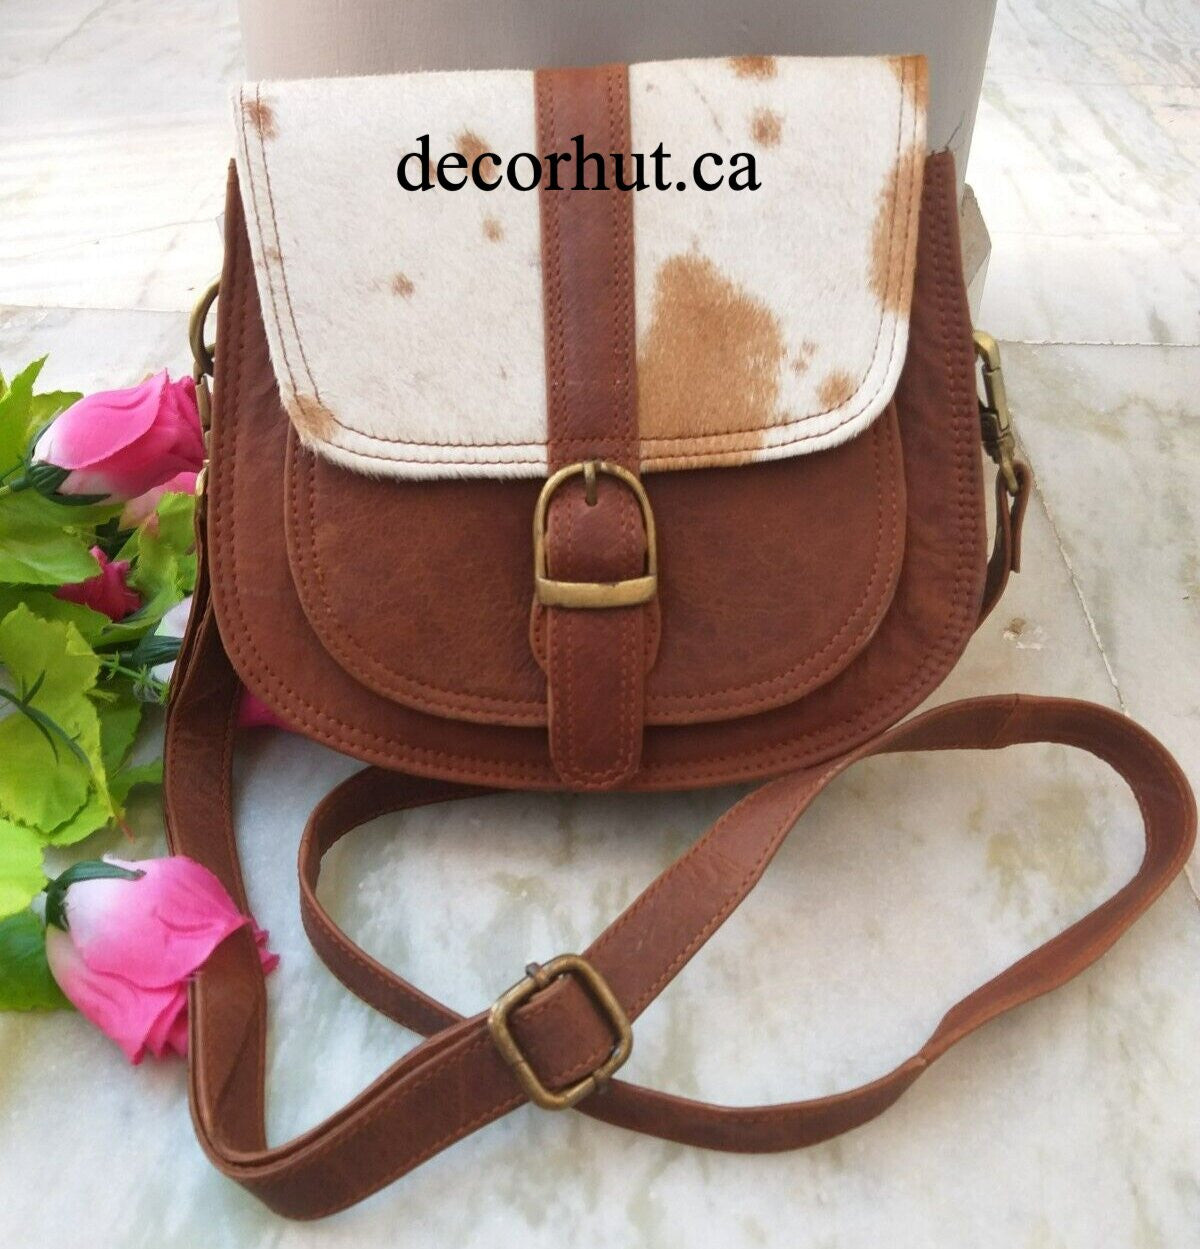 Discover a timeless look with this authentic cowhide handbag. This western-style purse features hair on leather, an adjustable strap, inside and outside pockets, and snap closure.